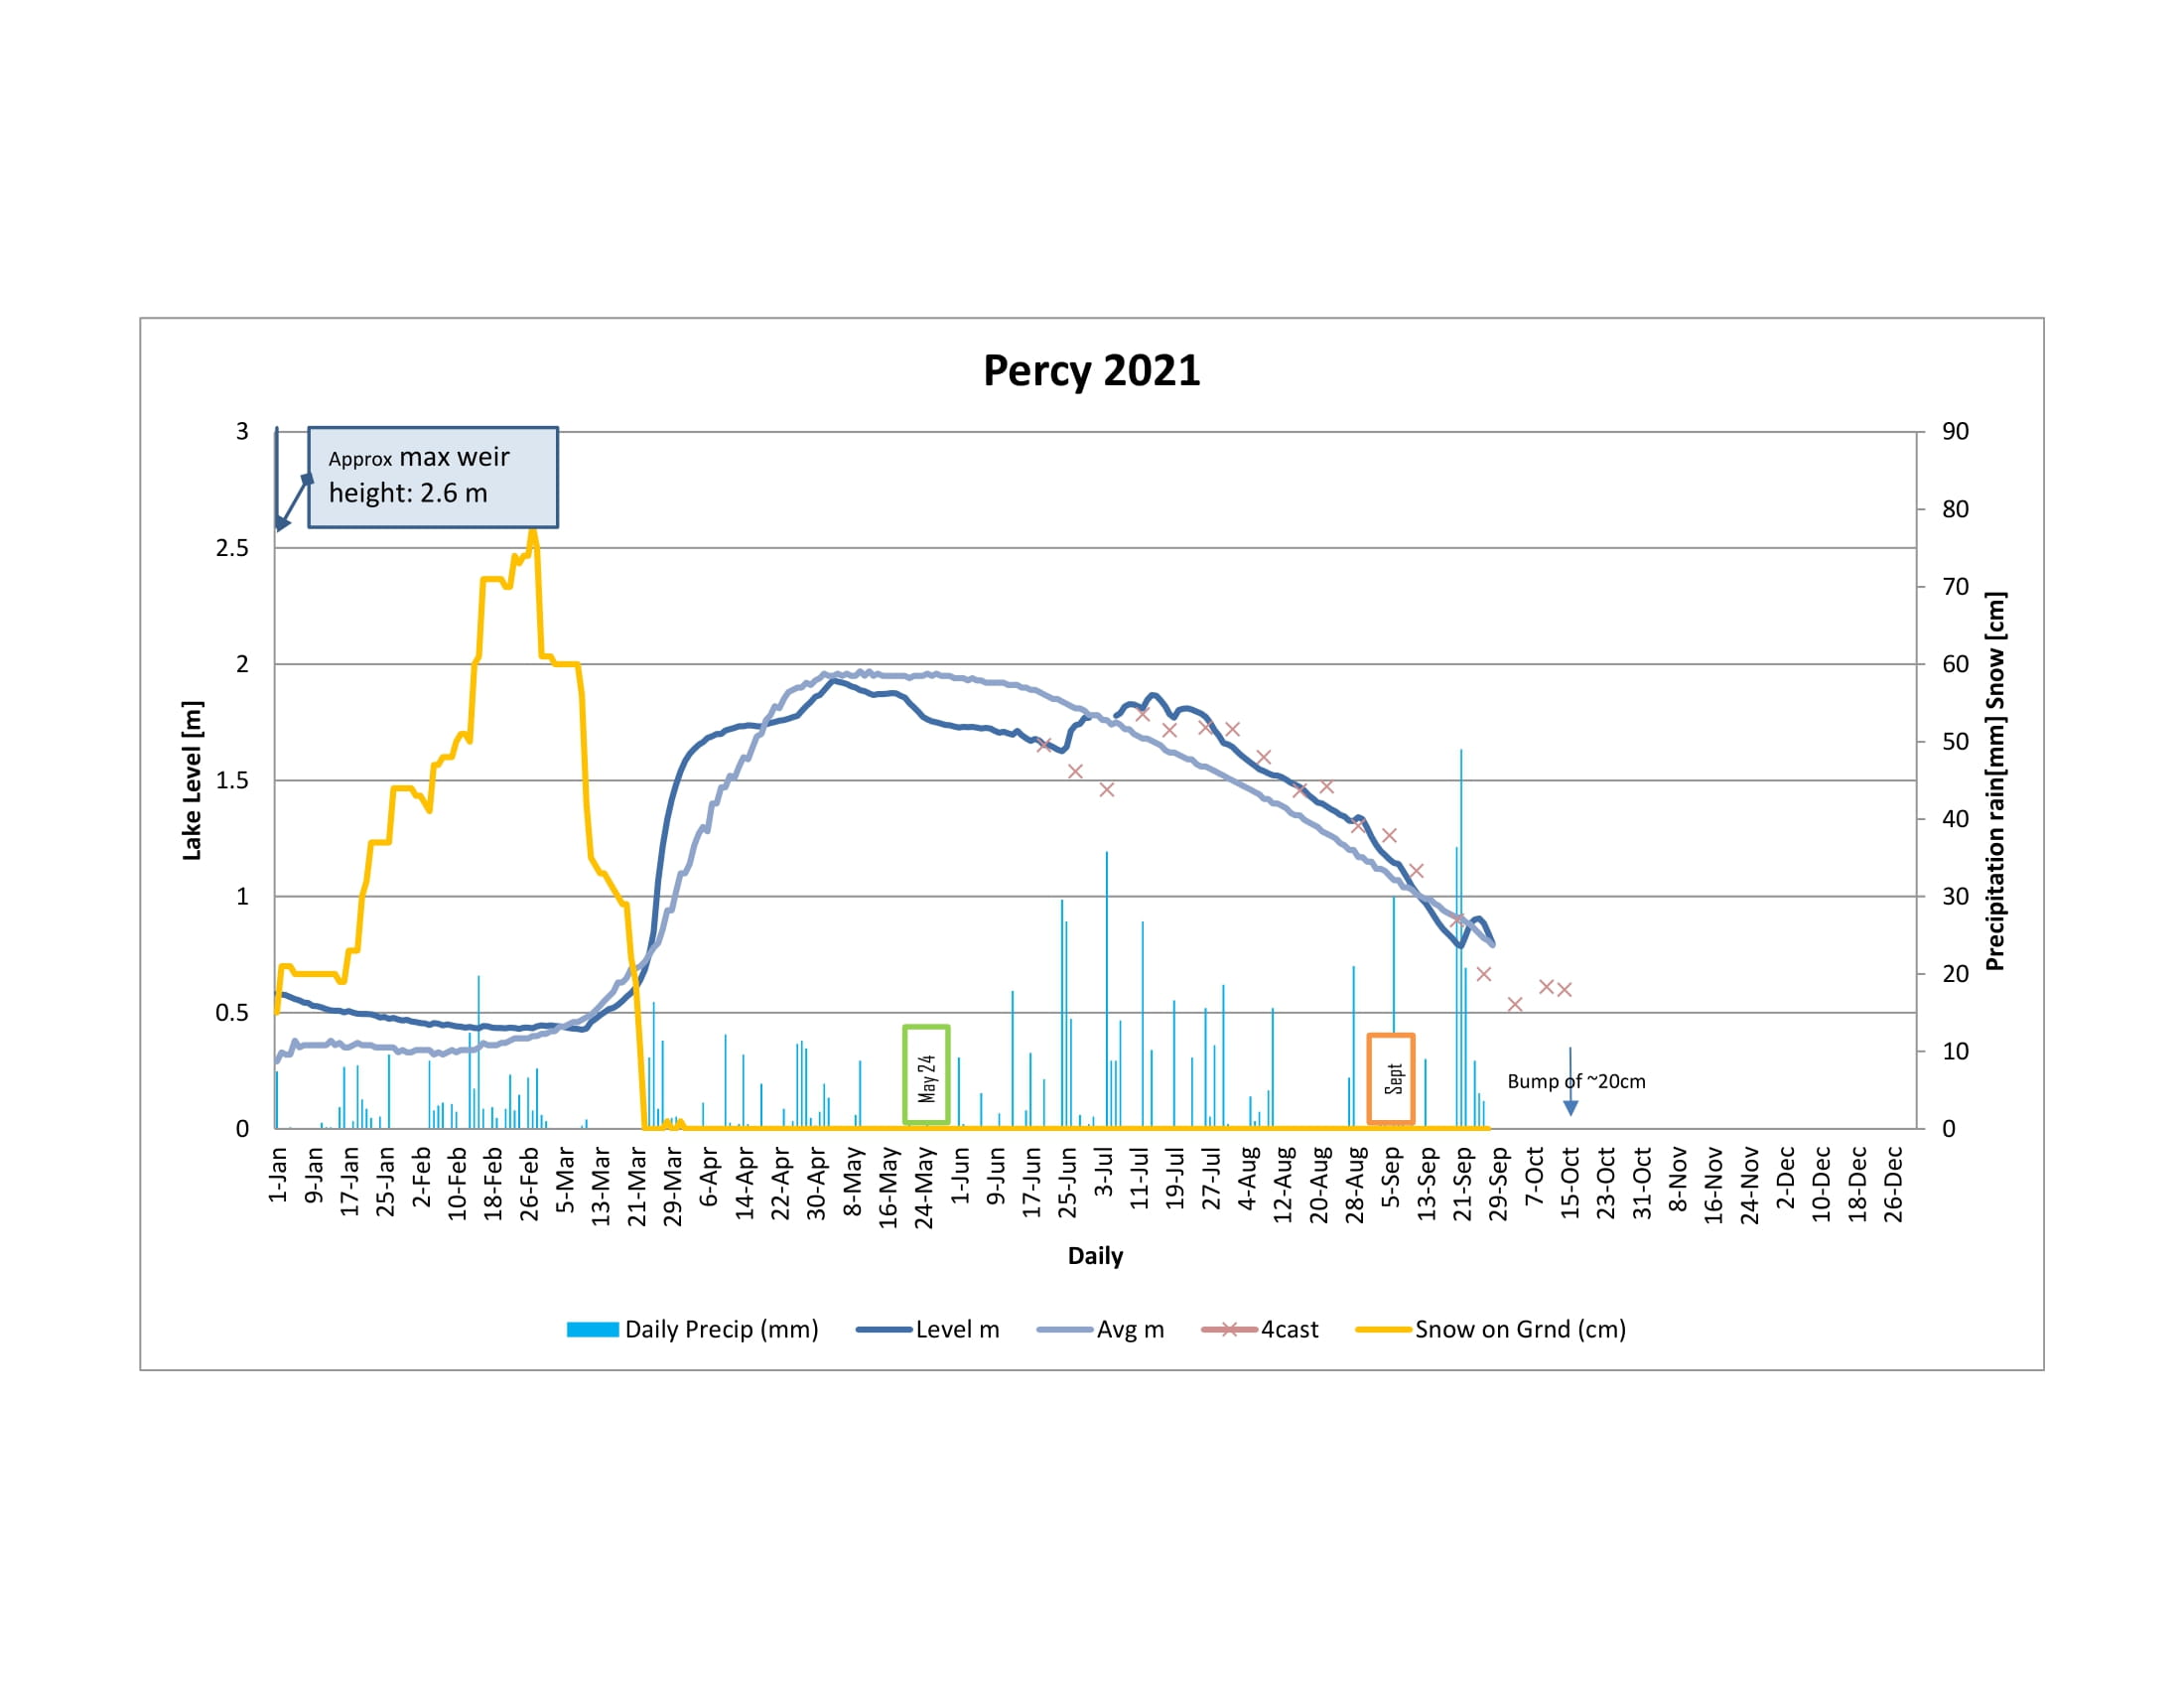 A graph showing the fluctuating water levels on Percy Lake in 2021.